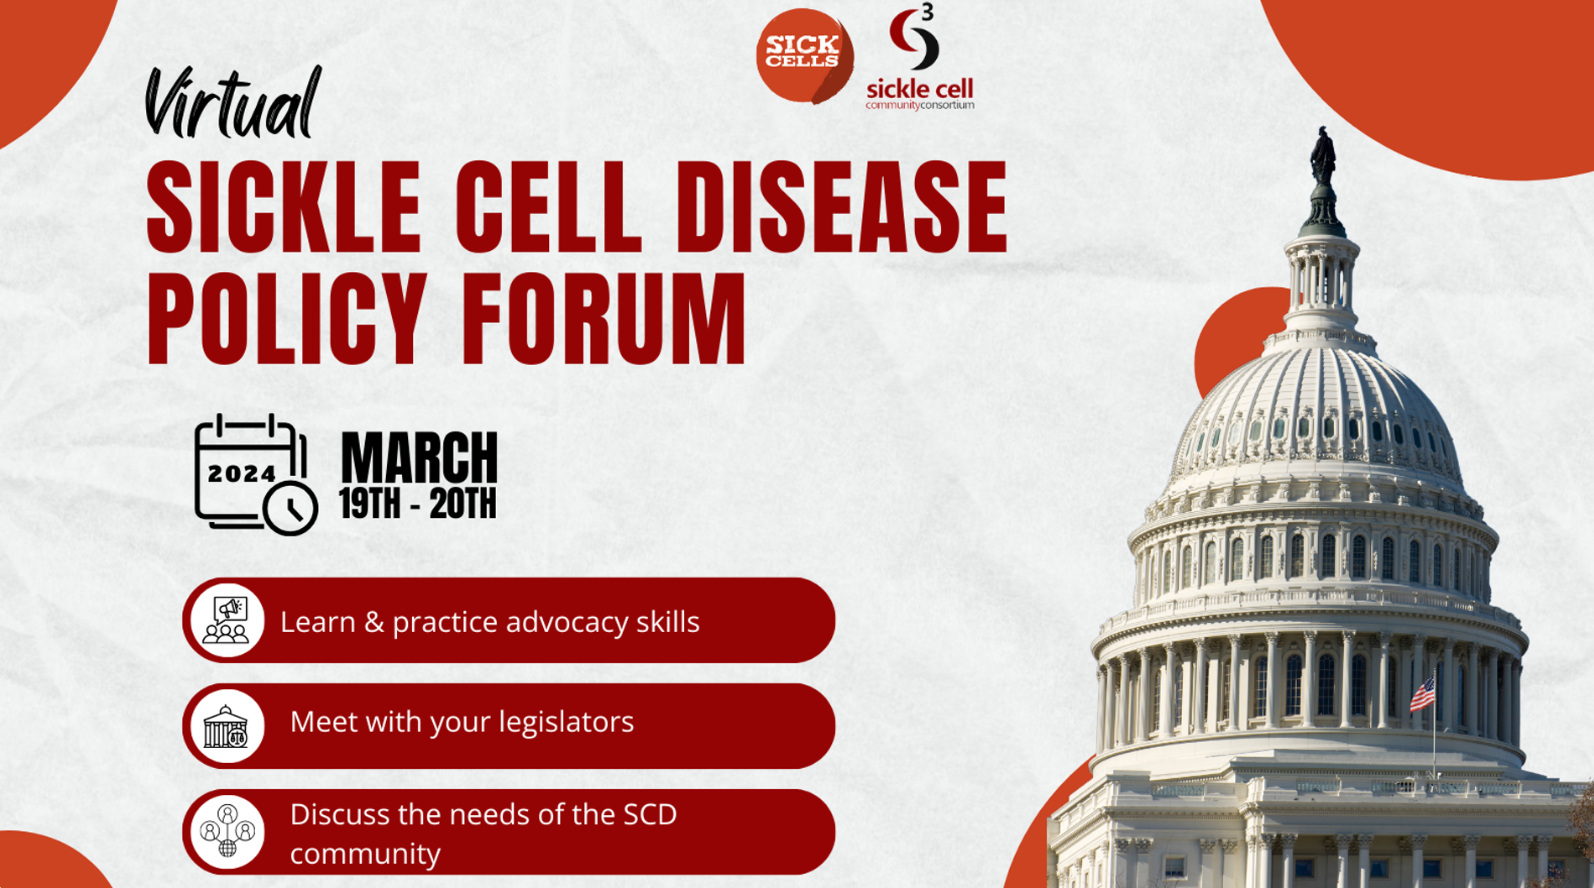 Virtual Sickle Cell Disease Policy Forum 